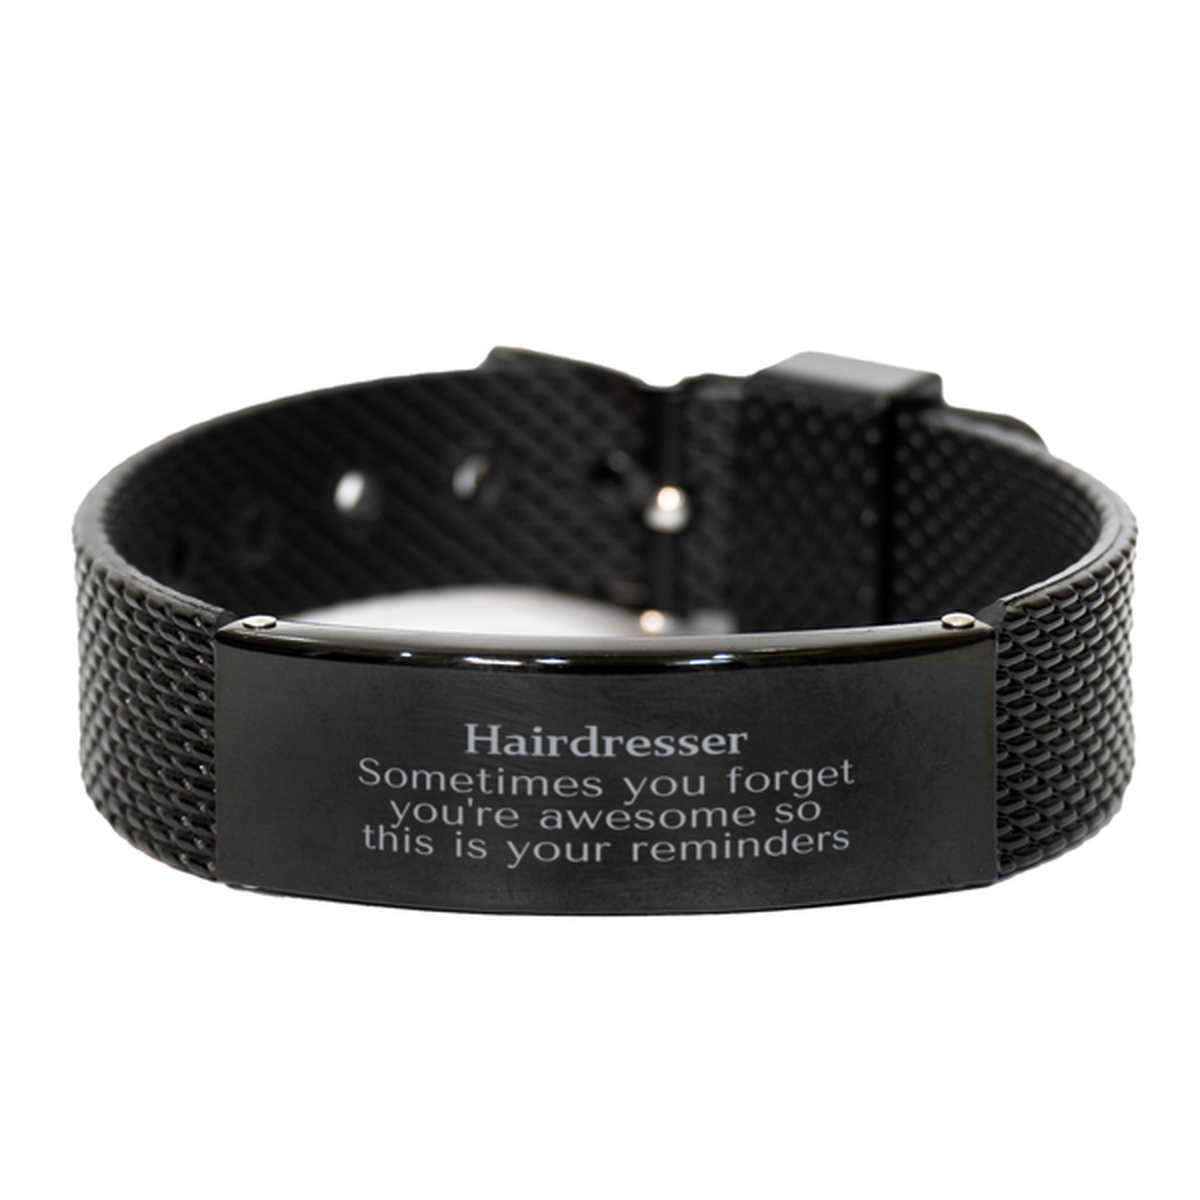 Sentimental Hairdresser Black Shark Mesh Bracelet, Hairdresser Sometimes you forget you're awesome so this is your reminders, Graduation Christmas Birthday Gifts for Hairdresser, Men, Women, Coworkers